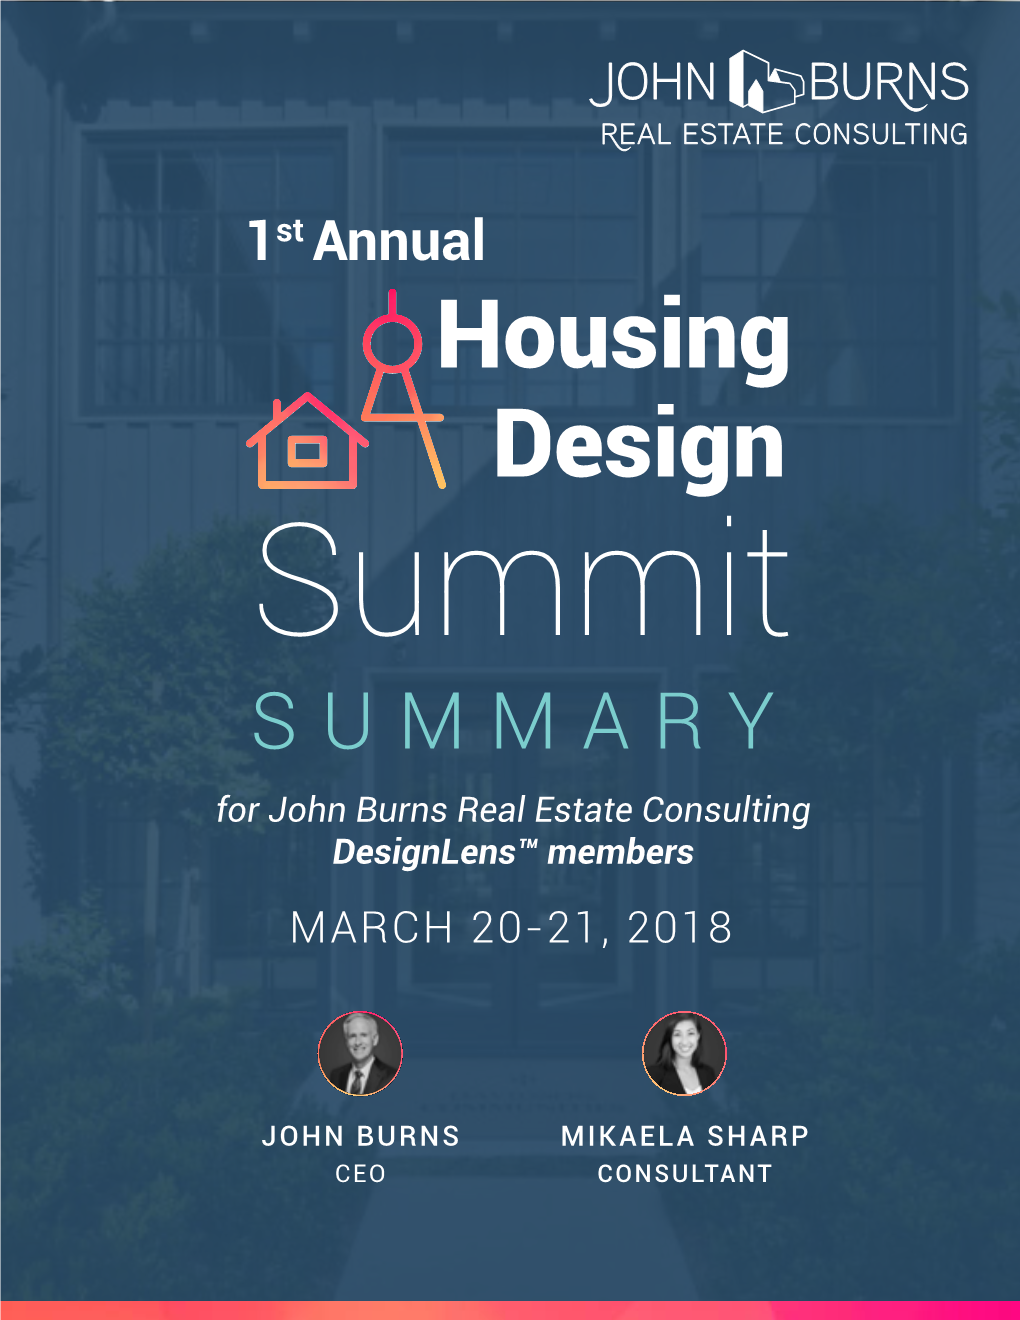 Housing Design Summit SUMMARY for John Burns Real Estate Consulting Designlens™ Members MARCH 20-21, 2018